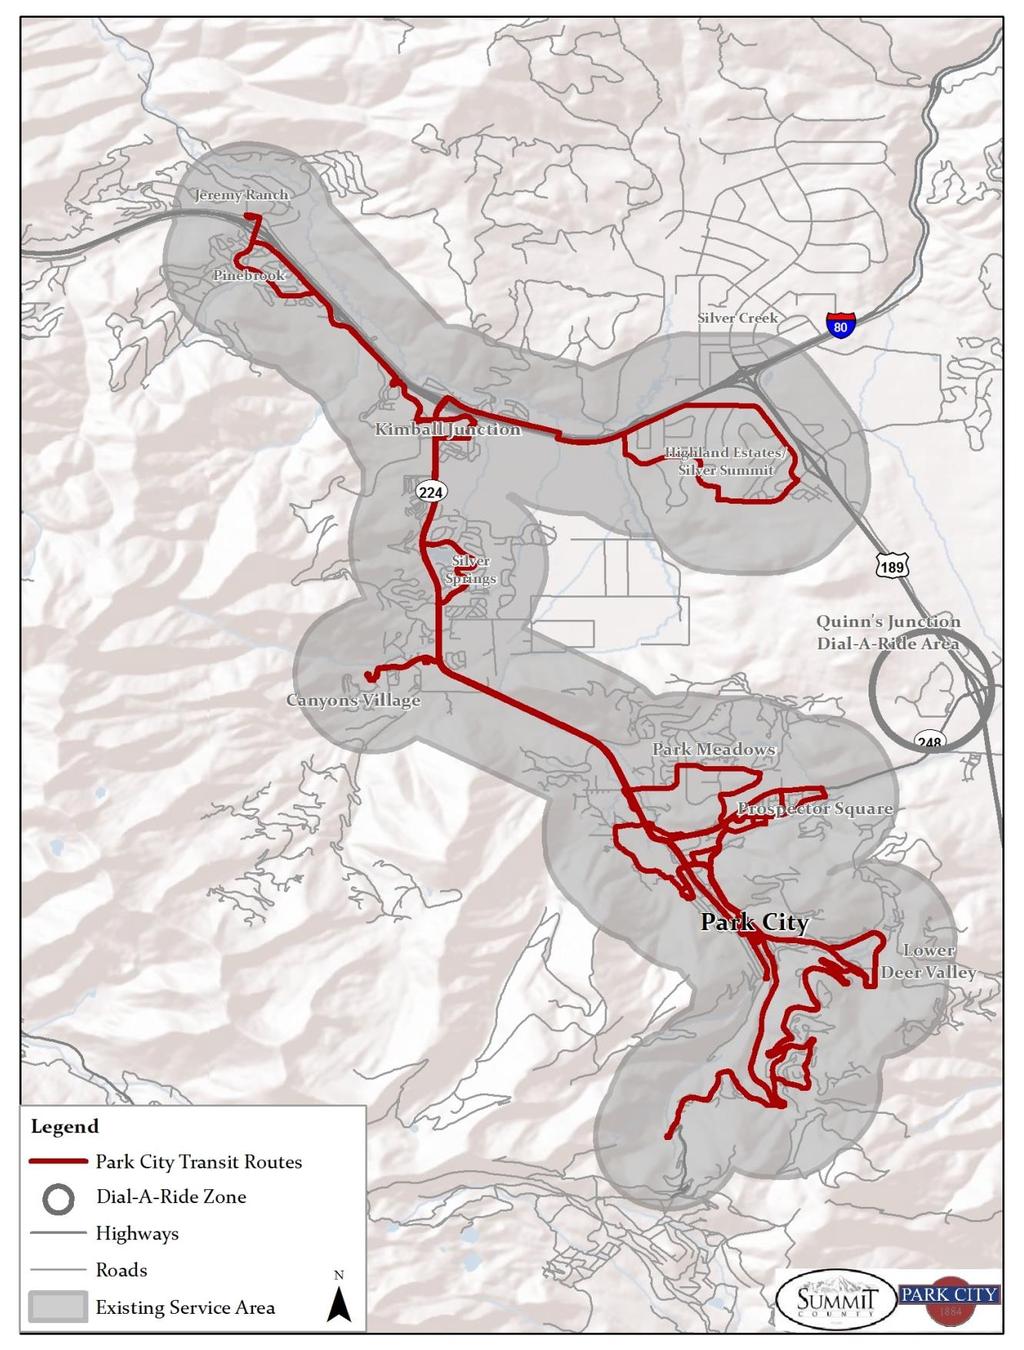 Figure 2-2: Park City and Summit County Transit Service Area